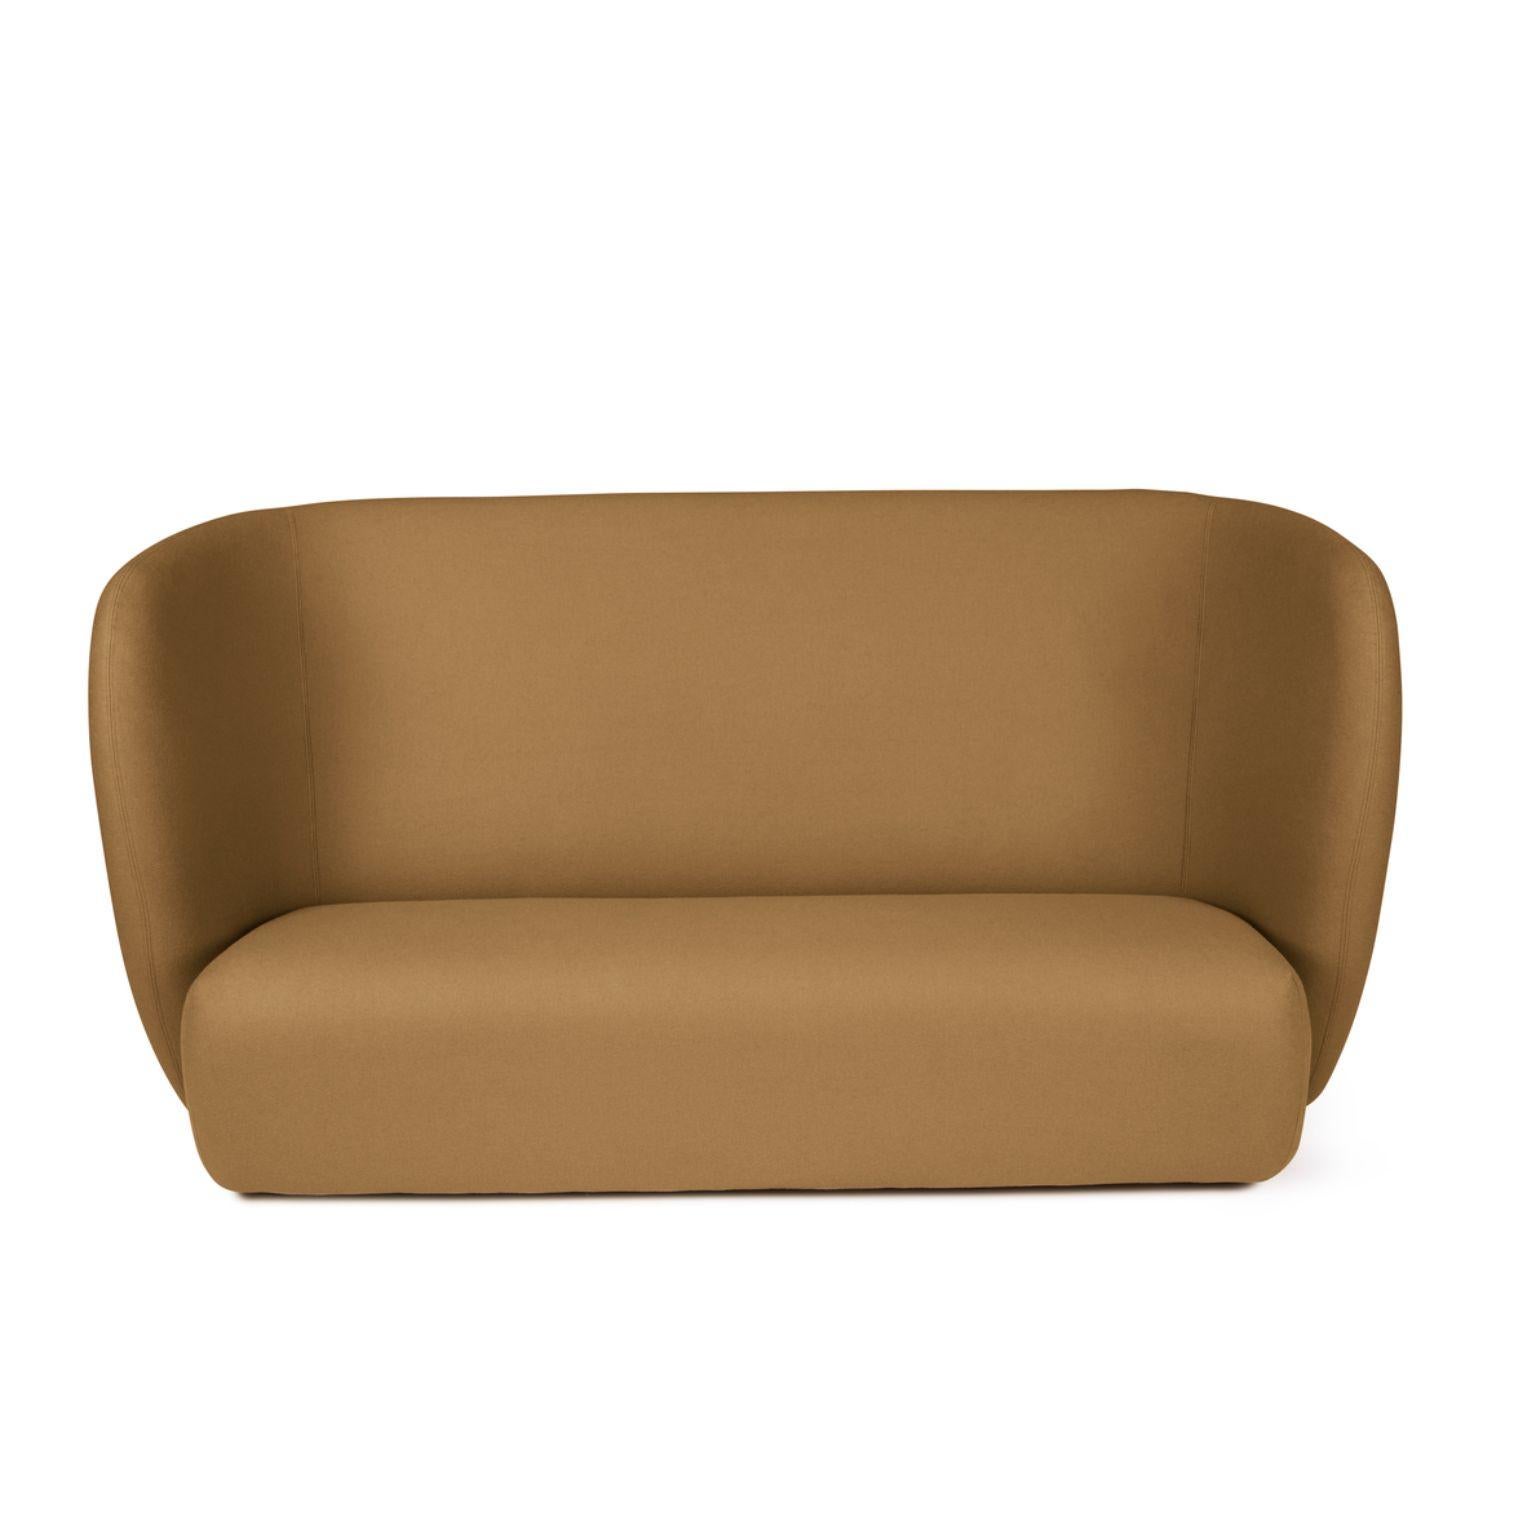 Haven 3 seater Olive by Warm Nordic
Dimensions: D220 x W84 x H 110/40 cm
Material: Textile upholstery, Foam, Spring system, Wood
Weight: 84 kg
Also available in different colours and finishes. 

Haven is a contemporary sofa with a simple, soft